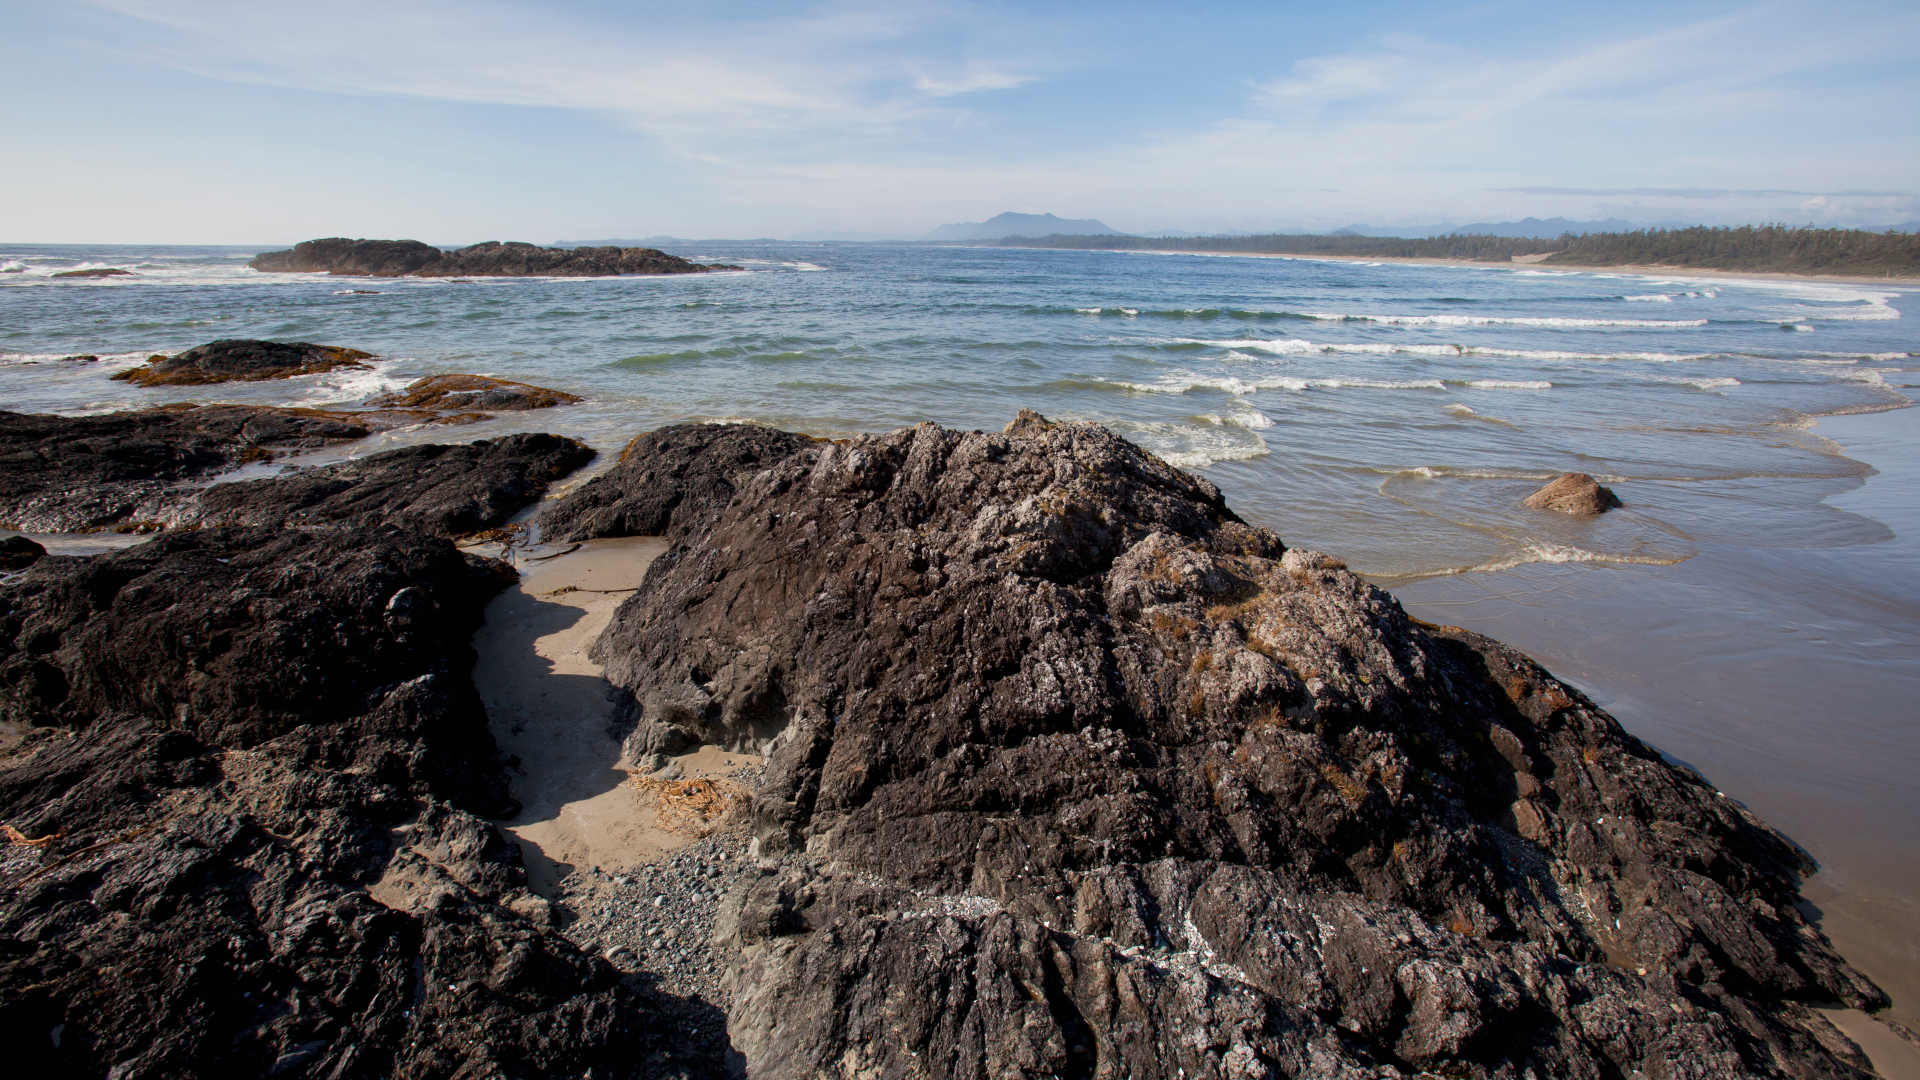 Off of the coastline of Vancouver Island, pictured here, basalt under the Cascadia Basin could theoretically store the carbon from all global emissions many times over.